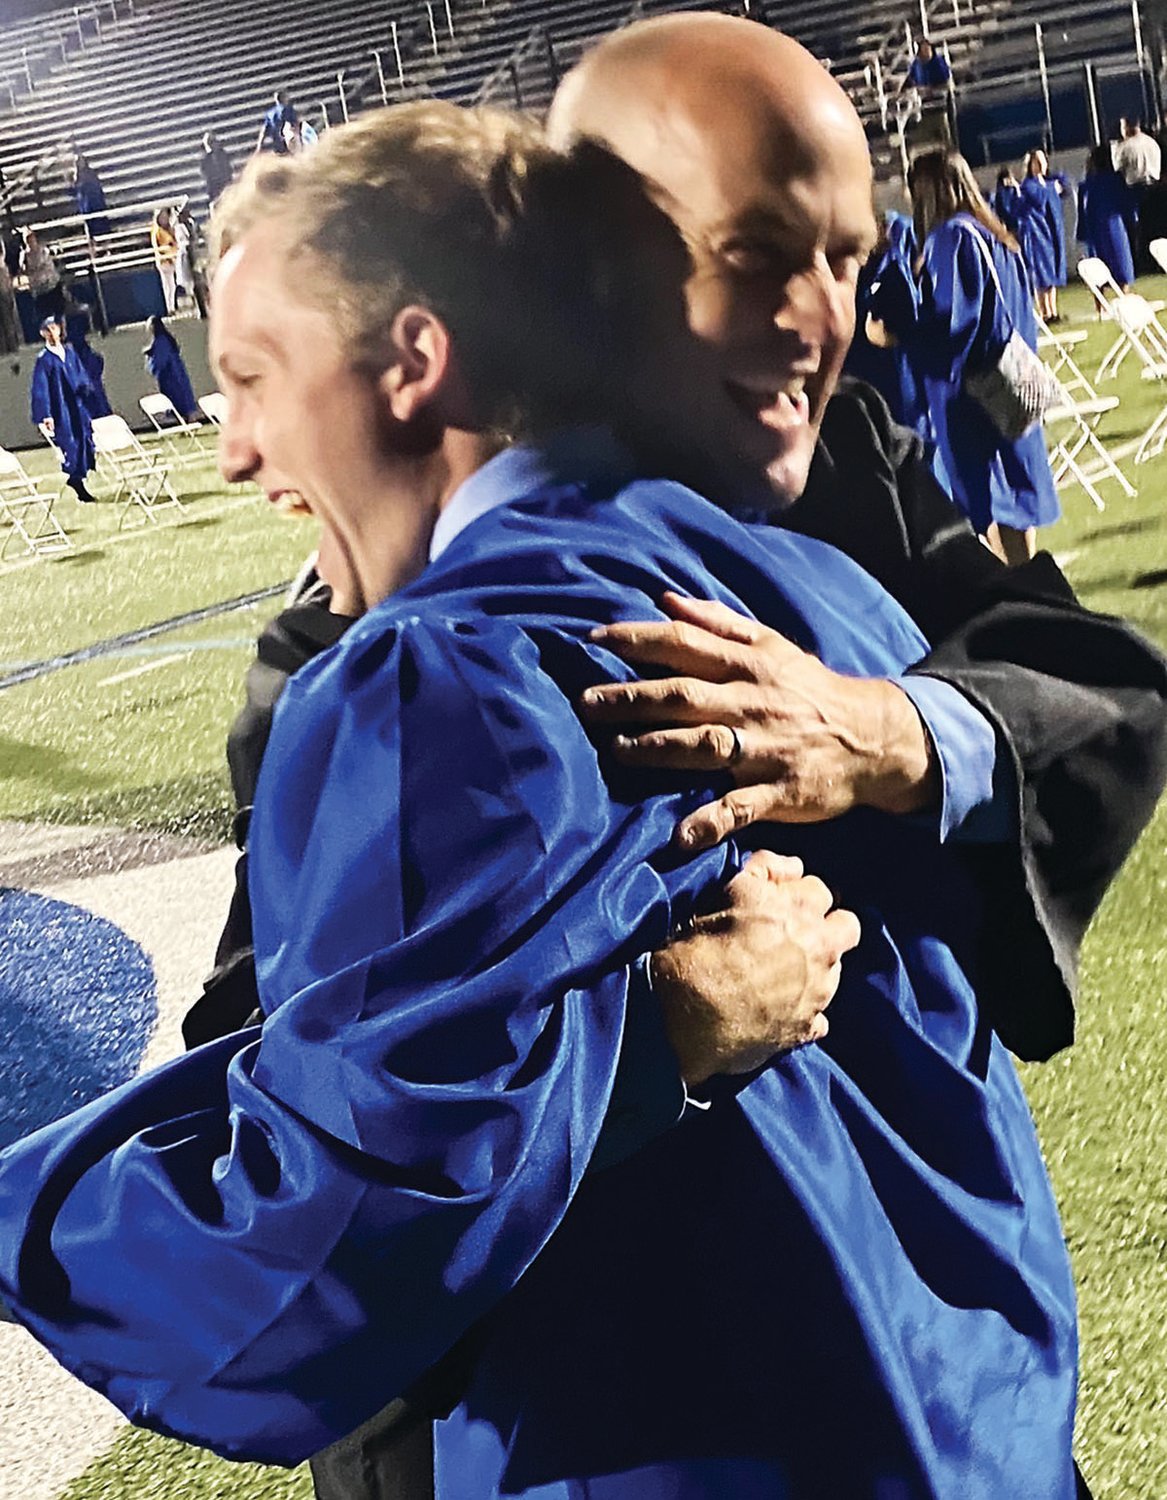 Quakertown Community High School student Mason Smith, left, and teacher Nick Hood celebrate Mason’s graduation June 18. After months of uncertainty, area schools held in-person commencement ceremonies.